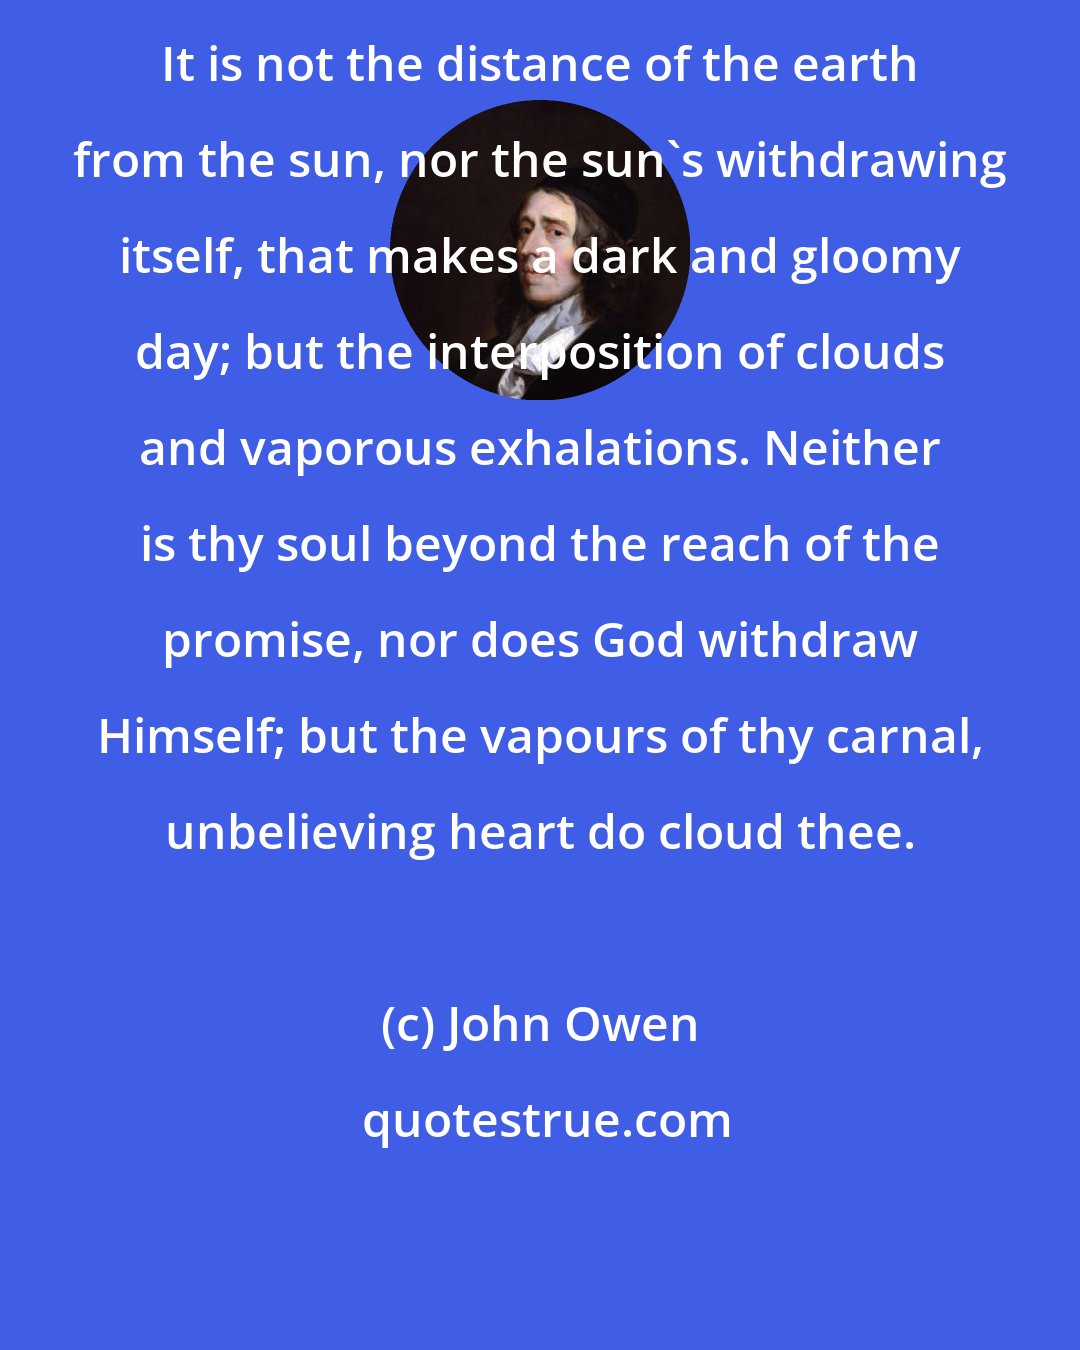 John Owen: It is not the distance of the earth from the sun, nor the sun's withdrawing itself, that makes a dark and gloomy day; but the interposition of clouds and vaporous exhalations. Neither is thy soul beyond the reach of the promise, nor does God withdraw Himself; but the vapours of thy carnal, unbelieving heart do cloud thee.